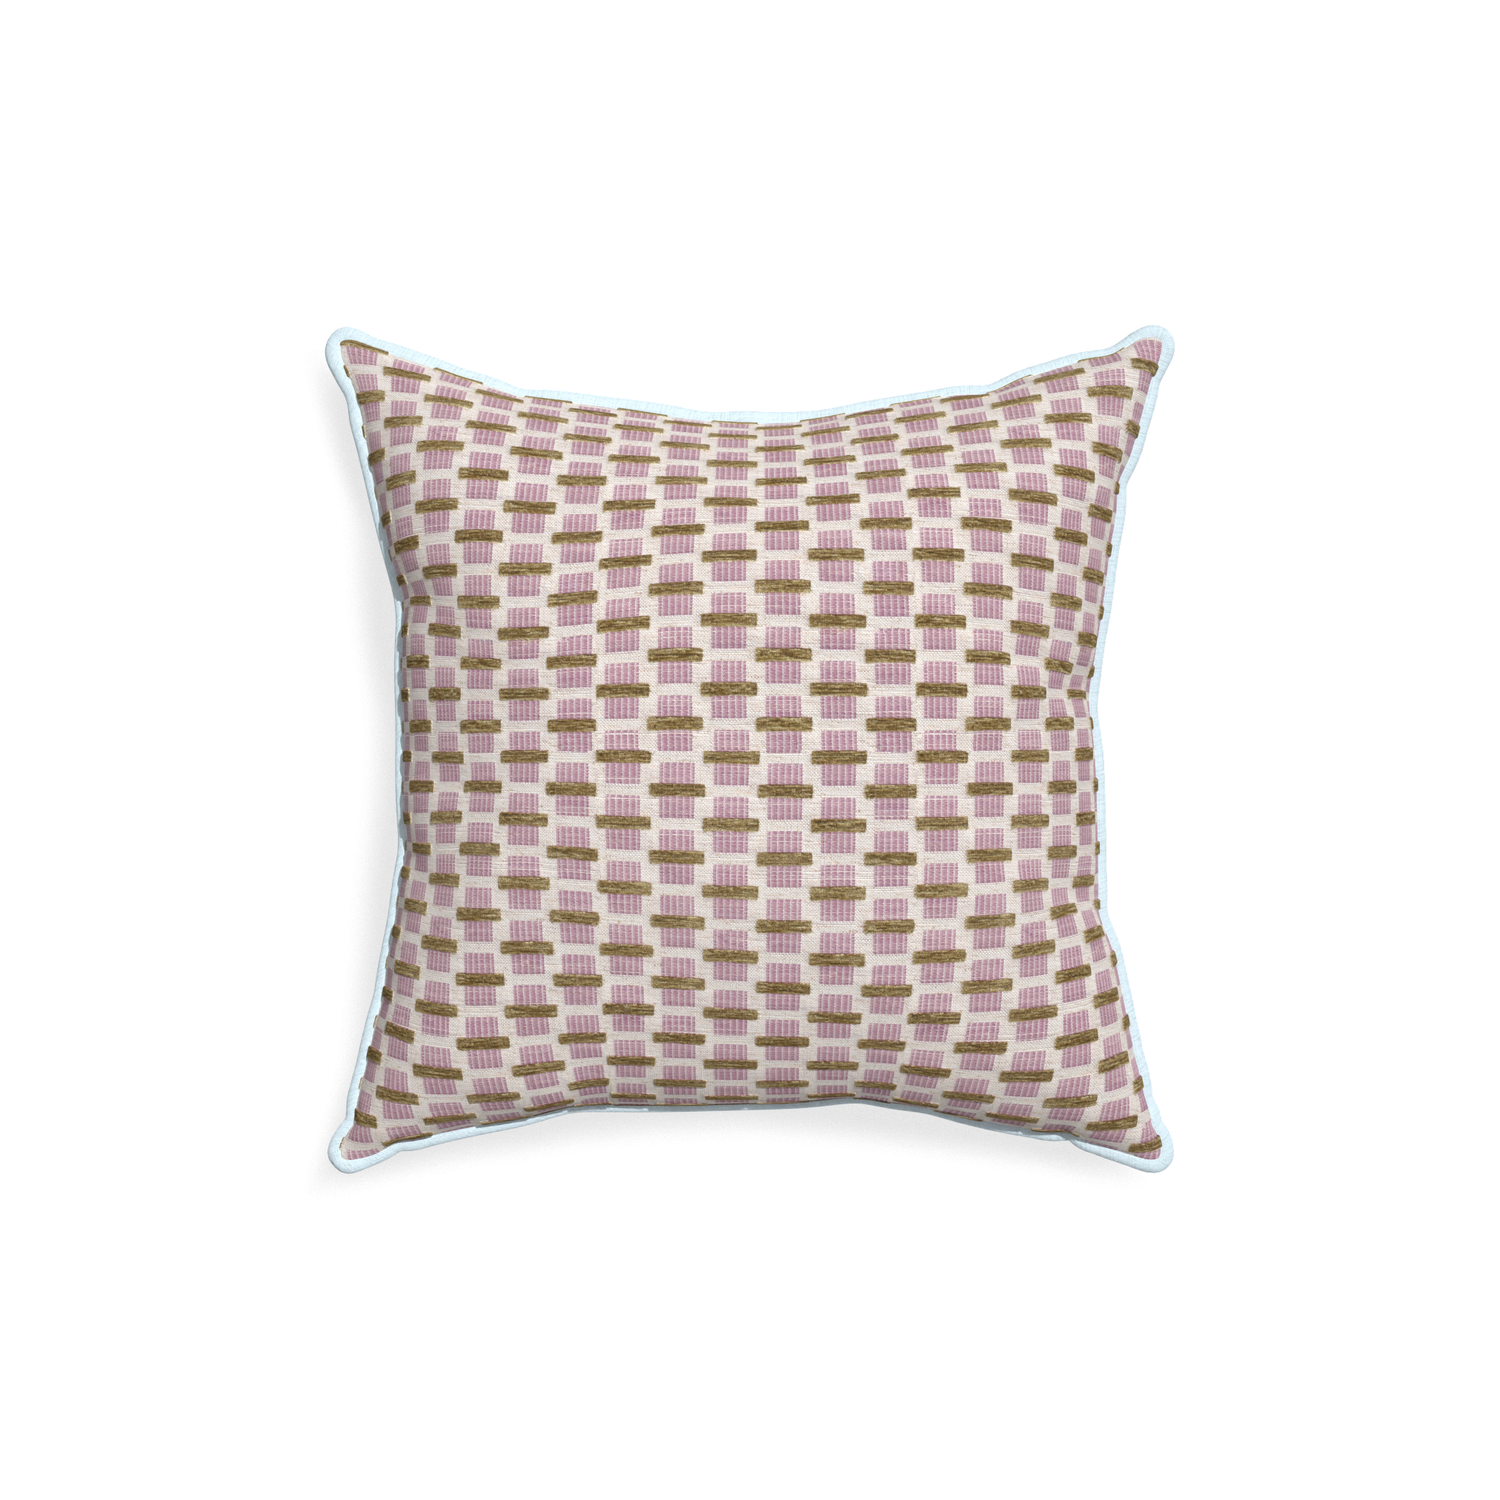 18-square willow orchid custom pink geometric chenillepillow with powder piping on white background